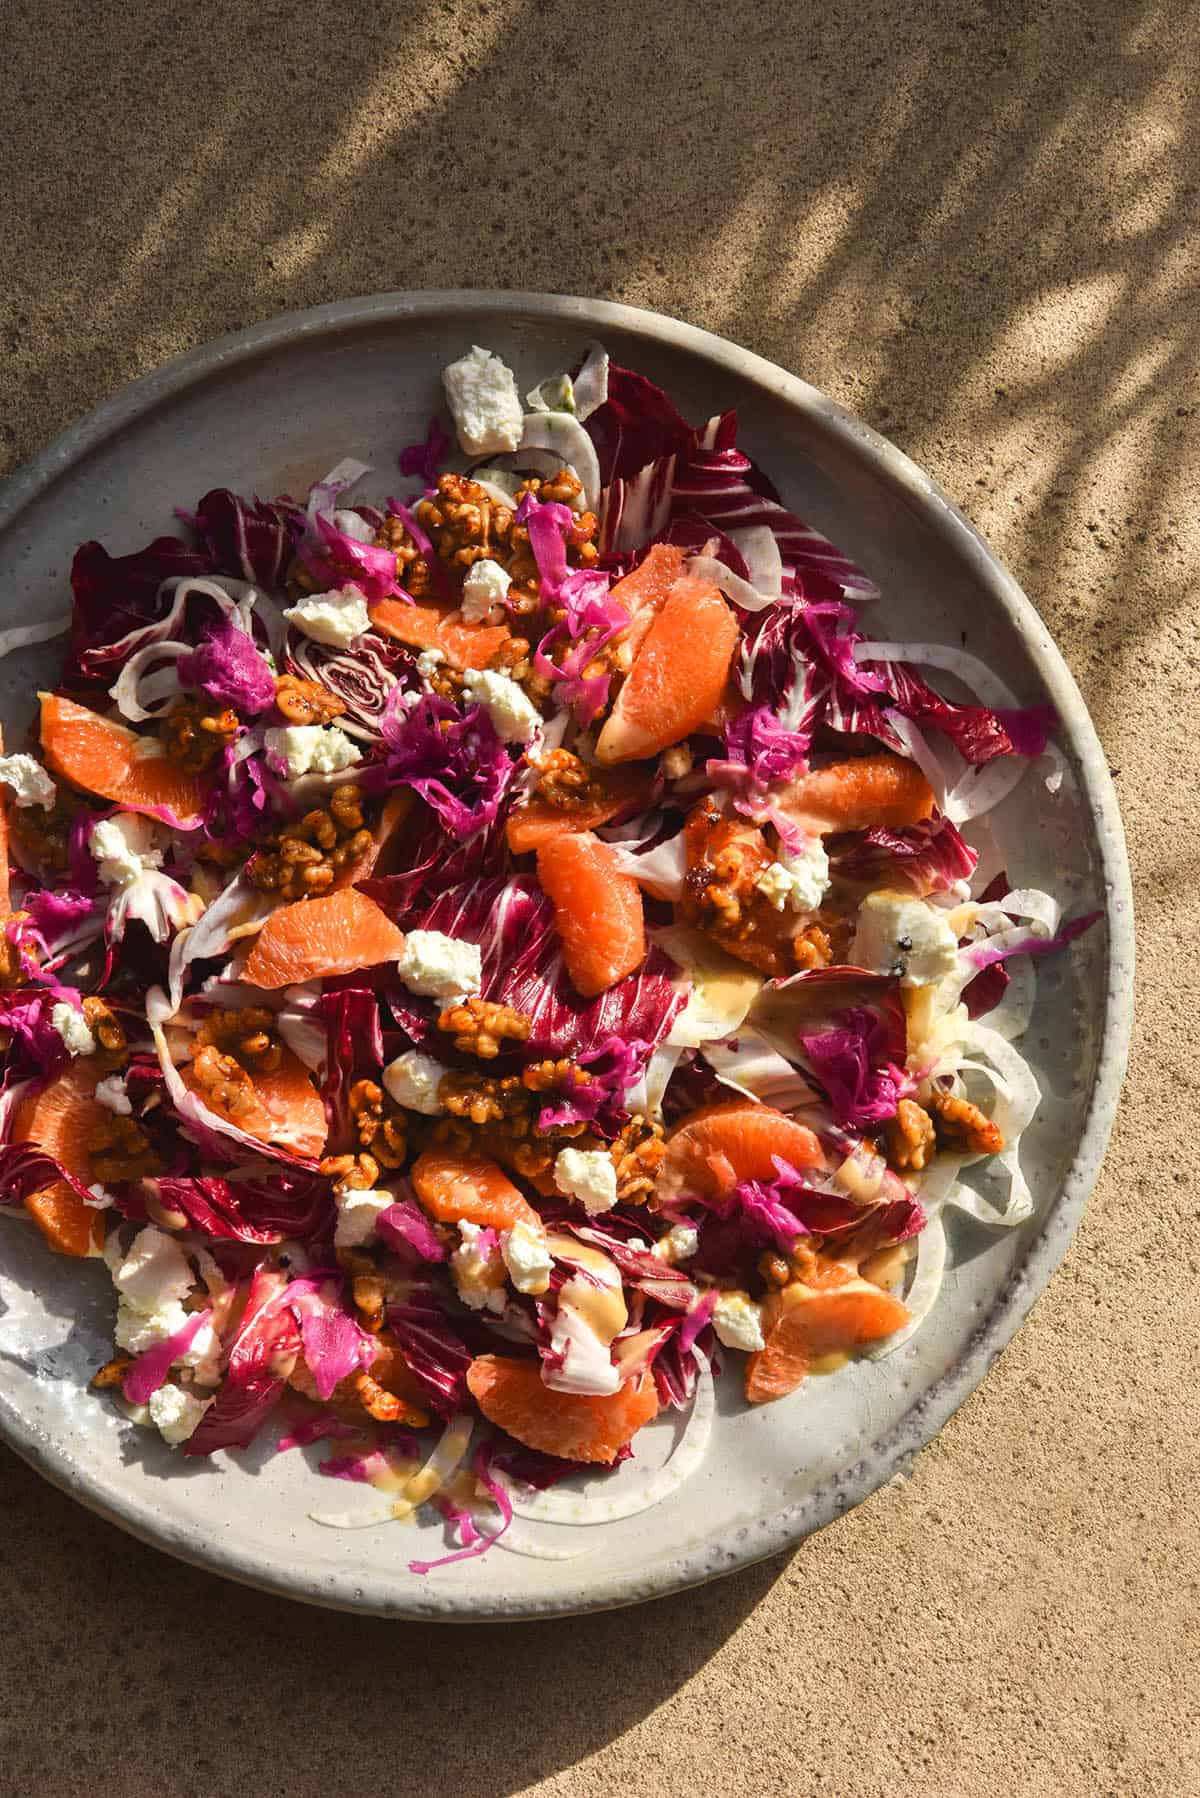 An aerial image of a radicchio, orange, fennel, goats cheese and maple chilli walnut salad. The salad tips atop a white ceramic plate against a stone backdrop and is bathed in sunlight. The top corner of the image features the contrasting shadows of long grassy leaves in the sunlight